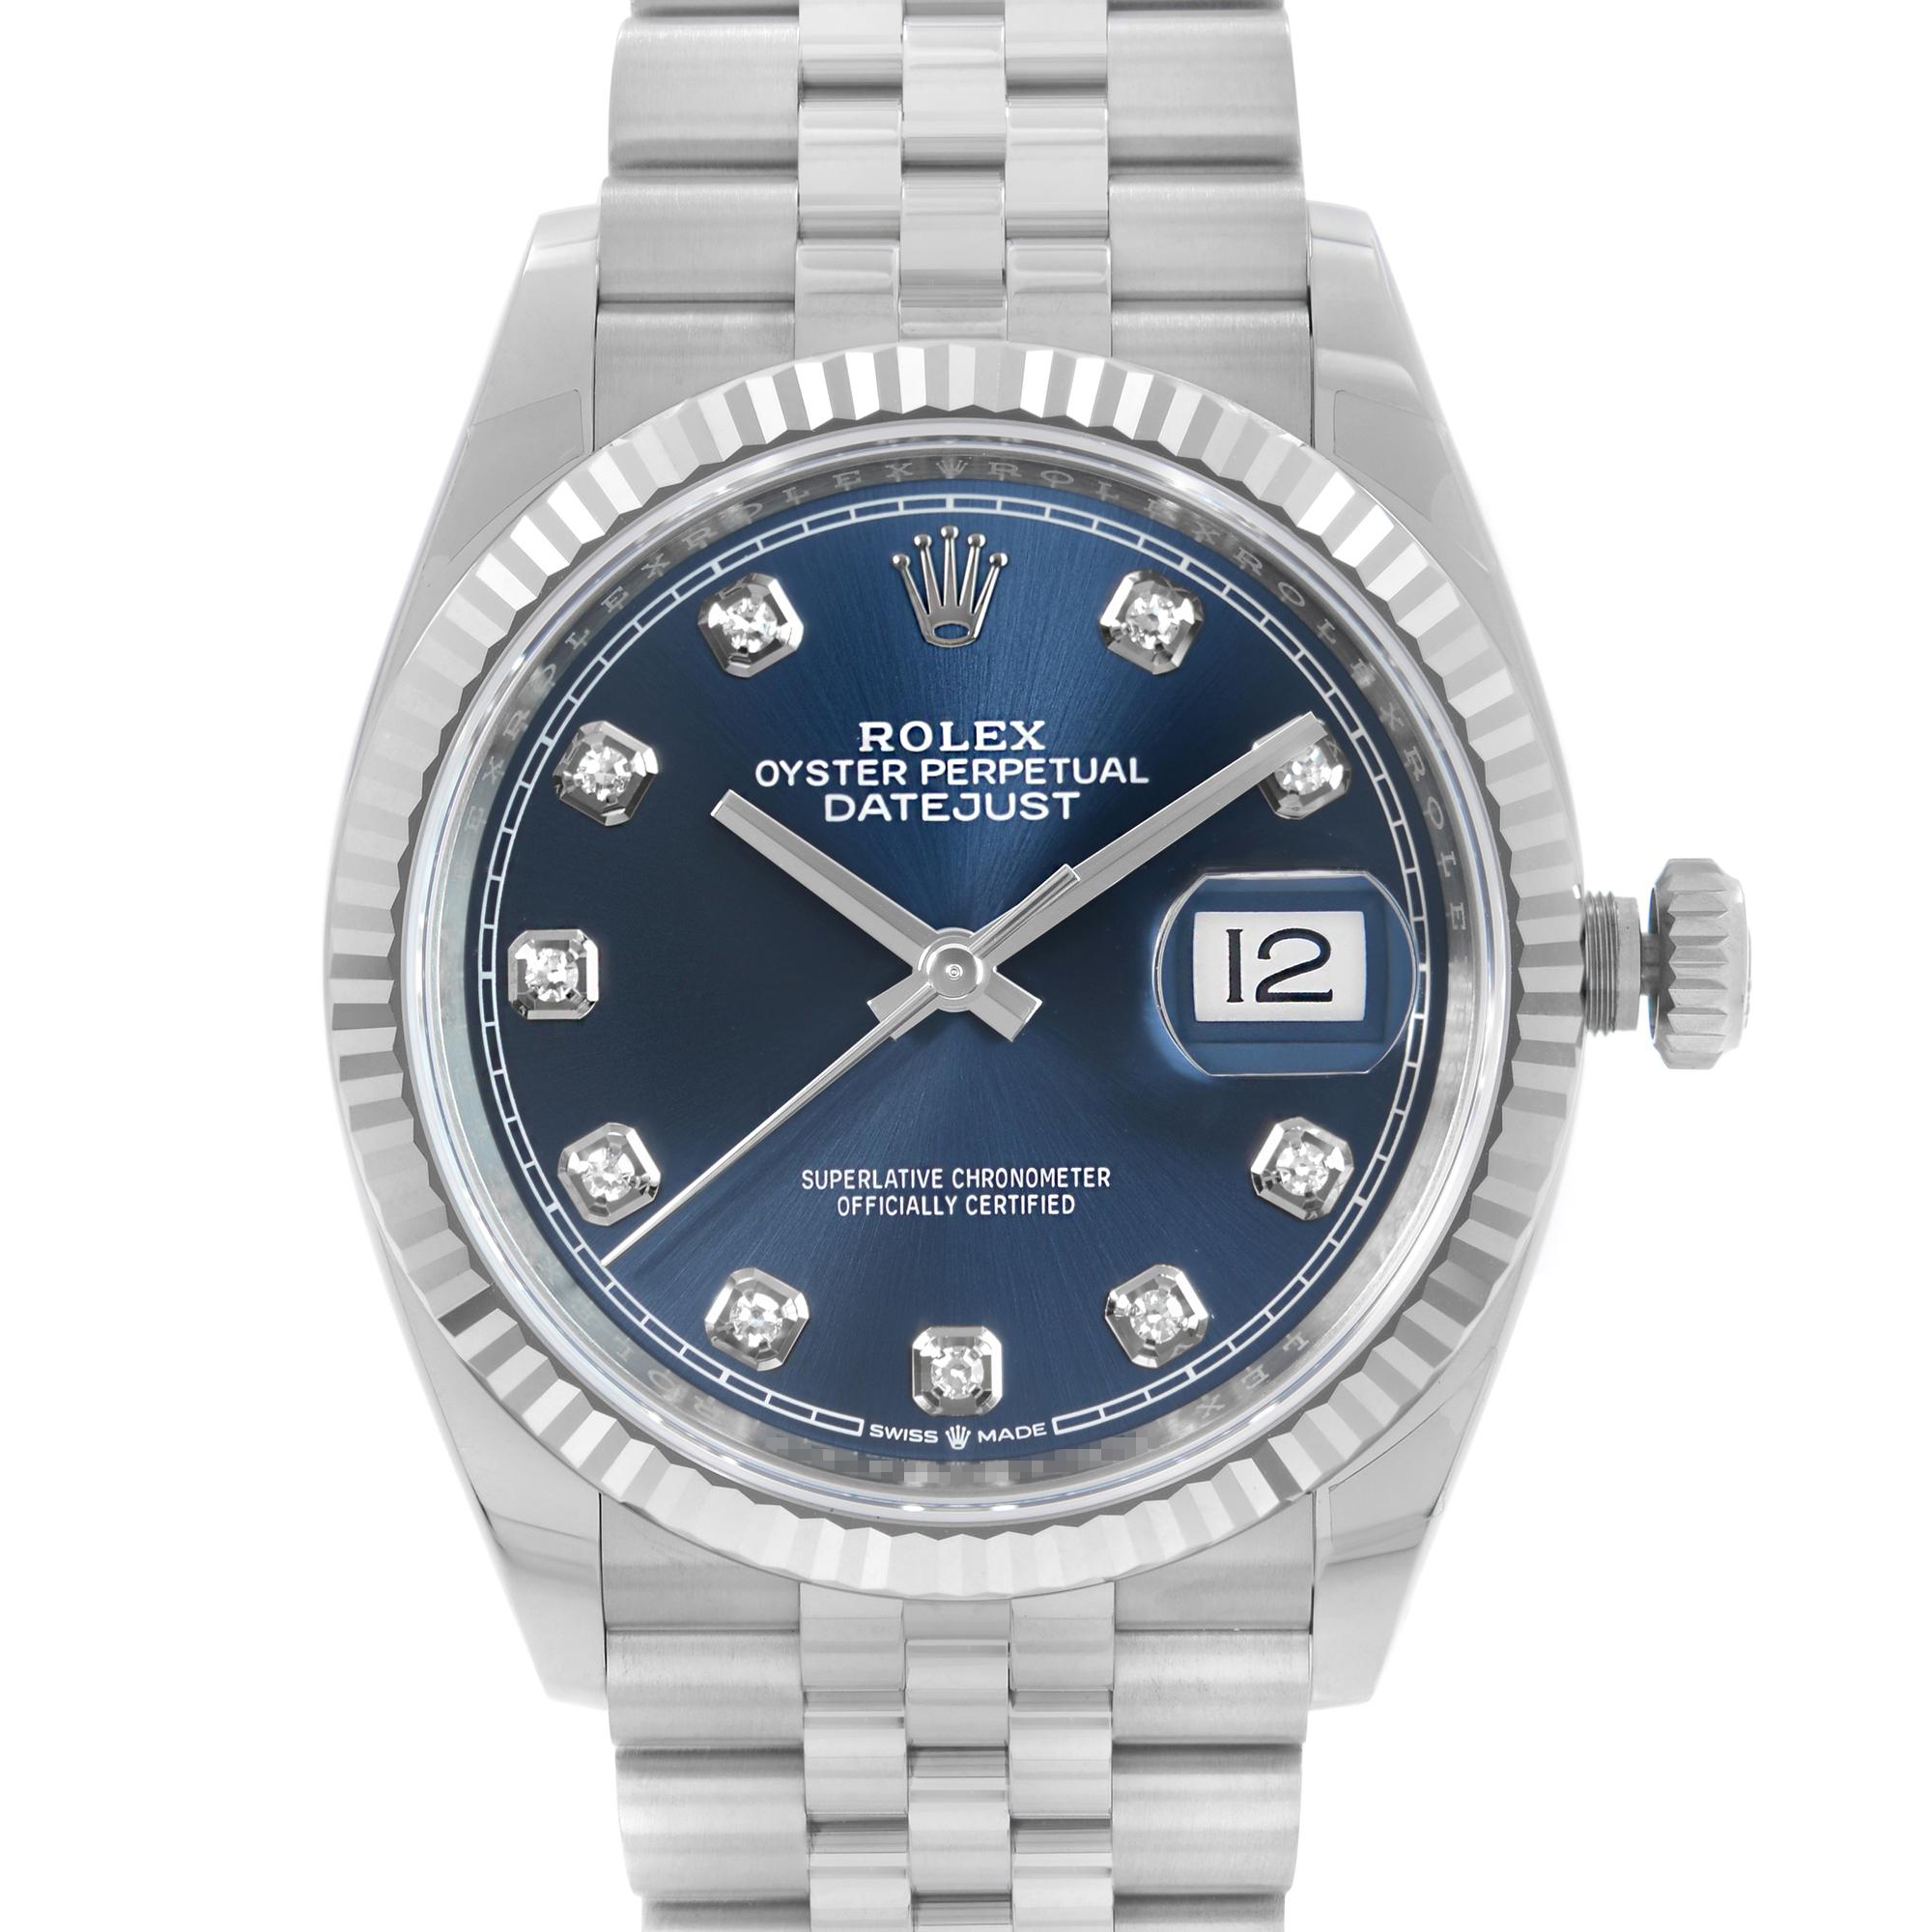 Unworn Rolex Datejust 36mm 18k White Gold Steel Blue Diamond Dial Automatic Watch 126234. Come with a 2021 Card. This Timepiece is Powered by an Automatic Movement and Features: Stainless Steel Case with a Stainless Steel Jubilee Bracelet, Fixed 18k